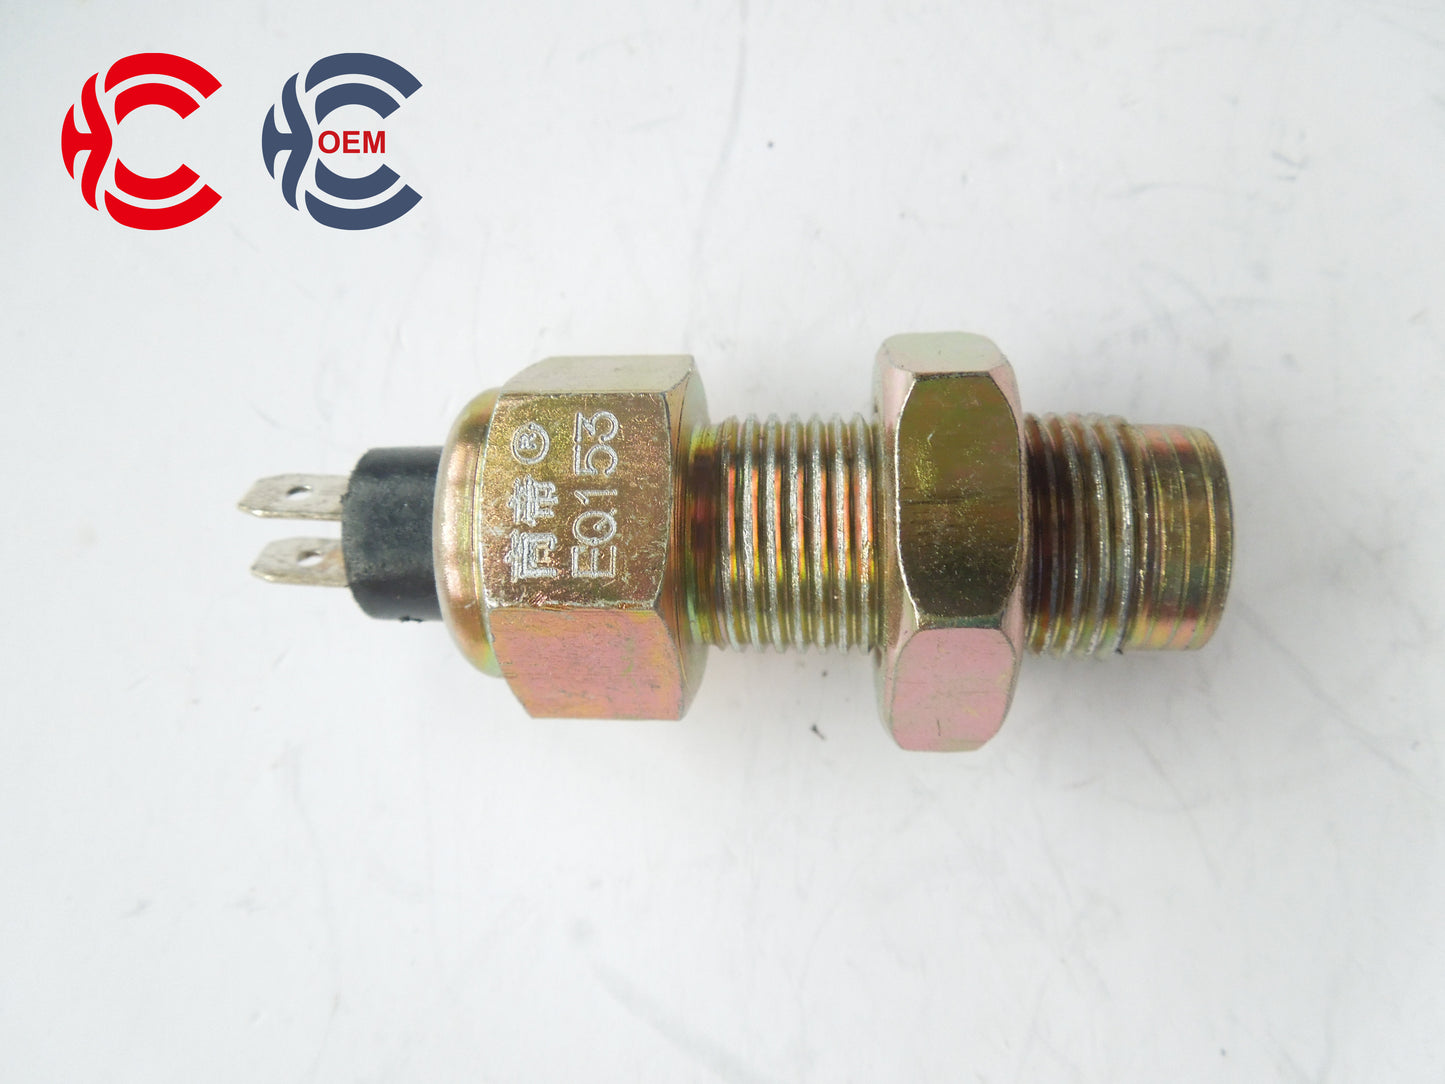 OEM: EQ153 35mmMaterial: ABS MetalColor: black silver goldenOrigin: Made in ChinaWeight: 100gPacking List: 1* Tachometric Transducer Magnetic Pick Up More ServiceWe can provide OEM Manufacturing serviceWe can Be your one-step solution for Auto PartsWe can provide technical scheme for you Feel Free to Contact Us, We will get back to you as soon as possible.